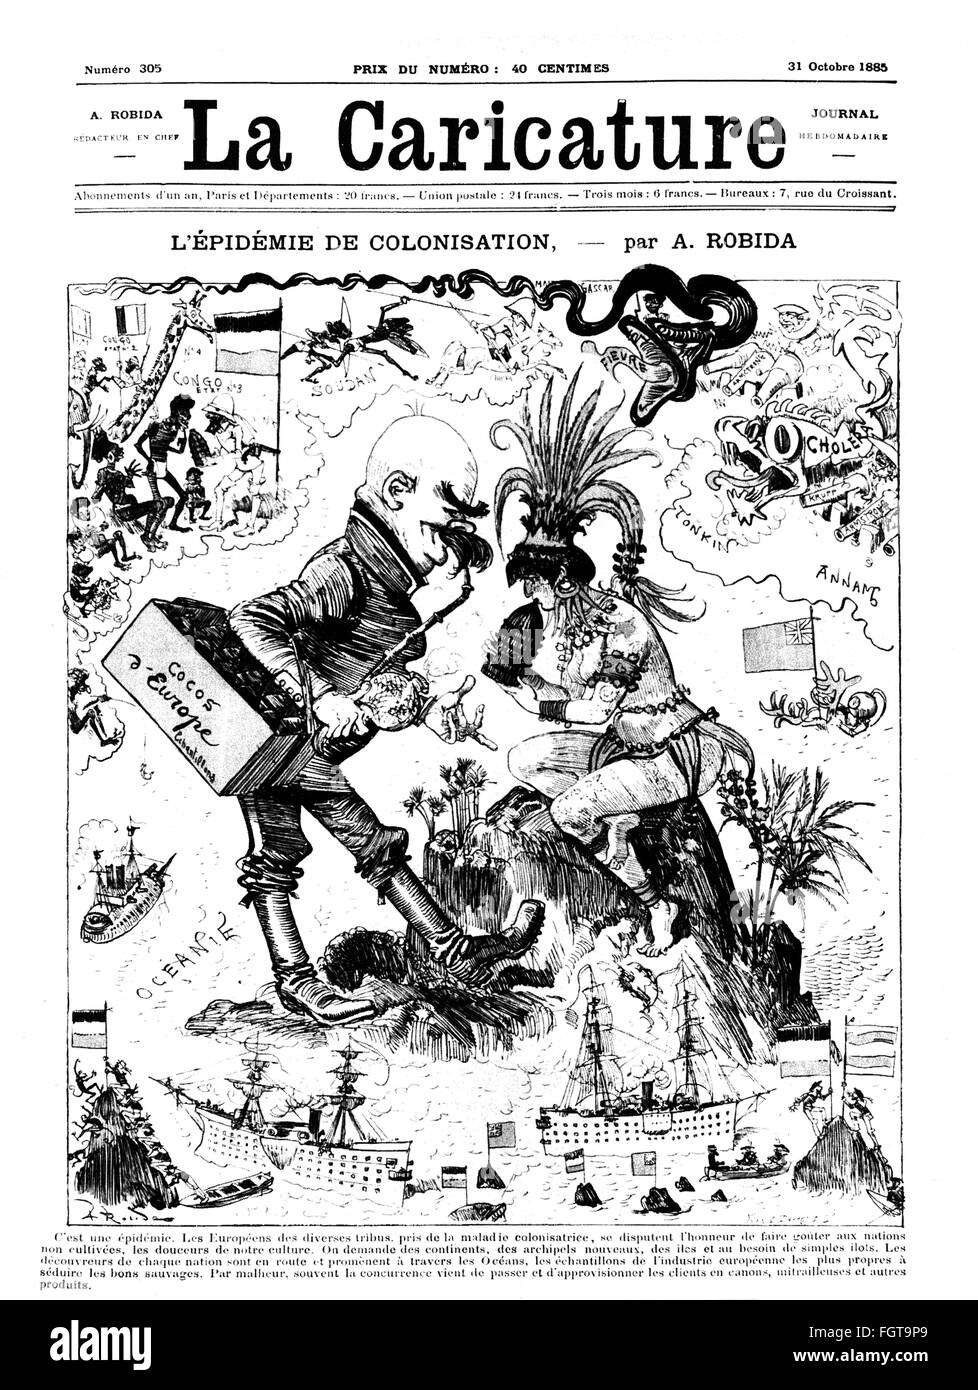 politics, colonial policy, caricature, 'The colonisation epidemic', drawing by Albert Robida, 'La Caricature', cover, Paris, 31.10.1885, Additional-Rights-Clearences-Not Available Stock Photo